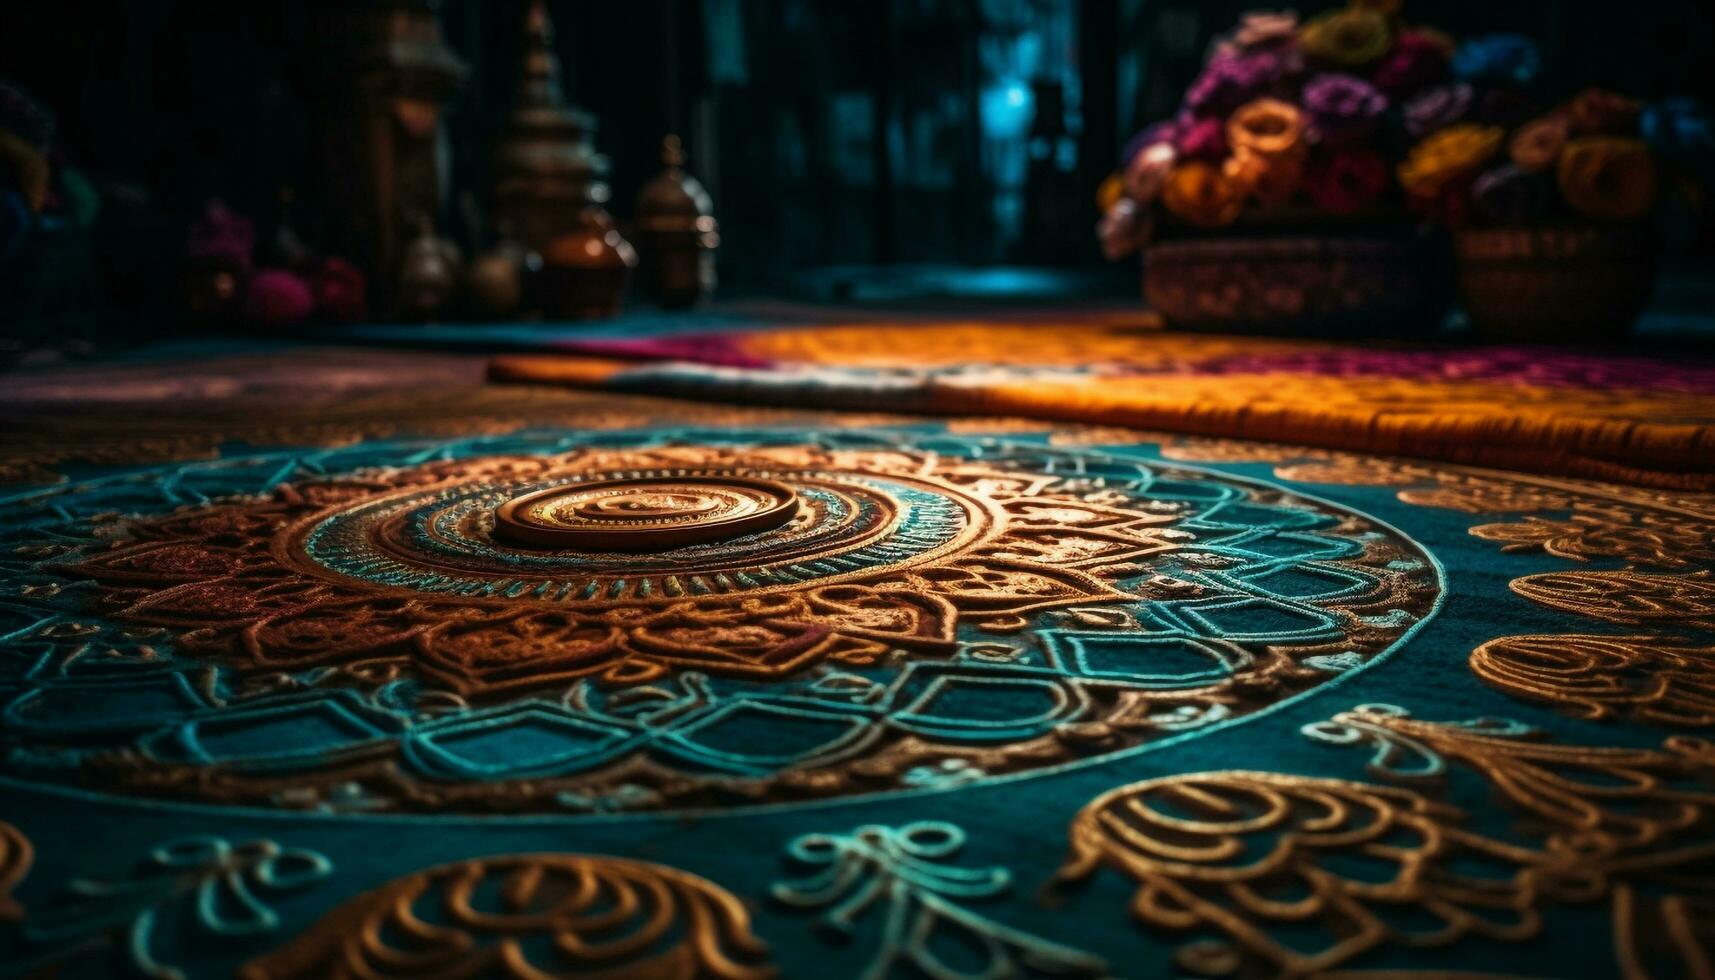 Ornate rug in ancient Indian architecture design generated by AI photo